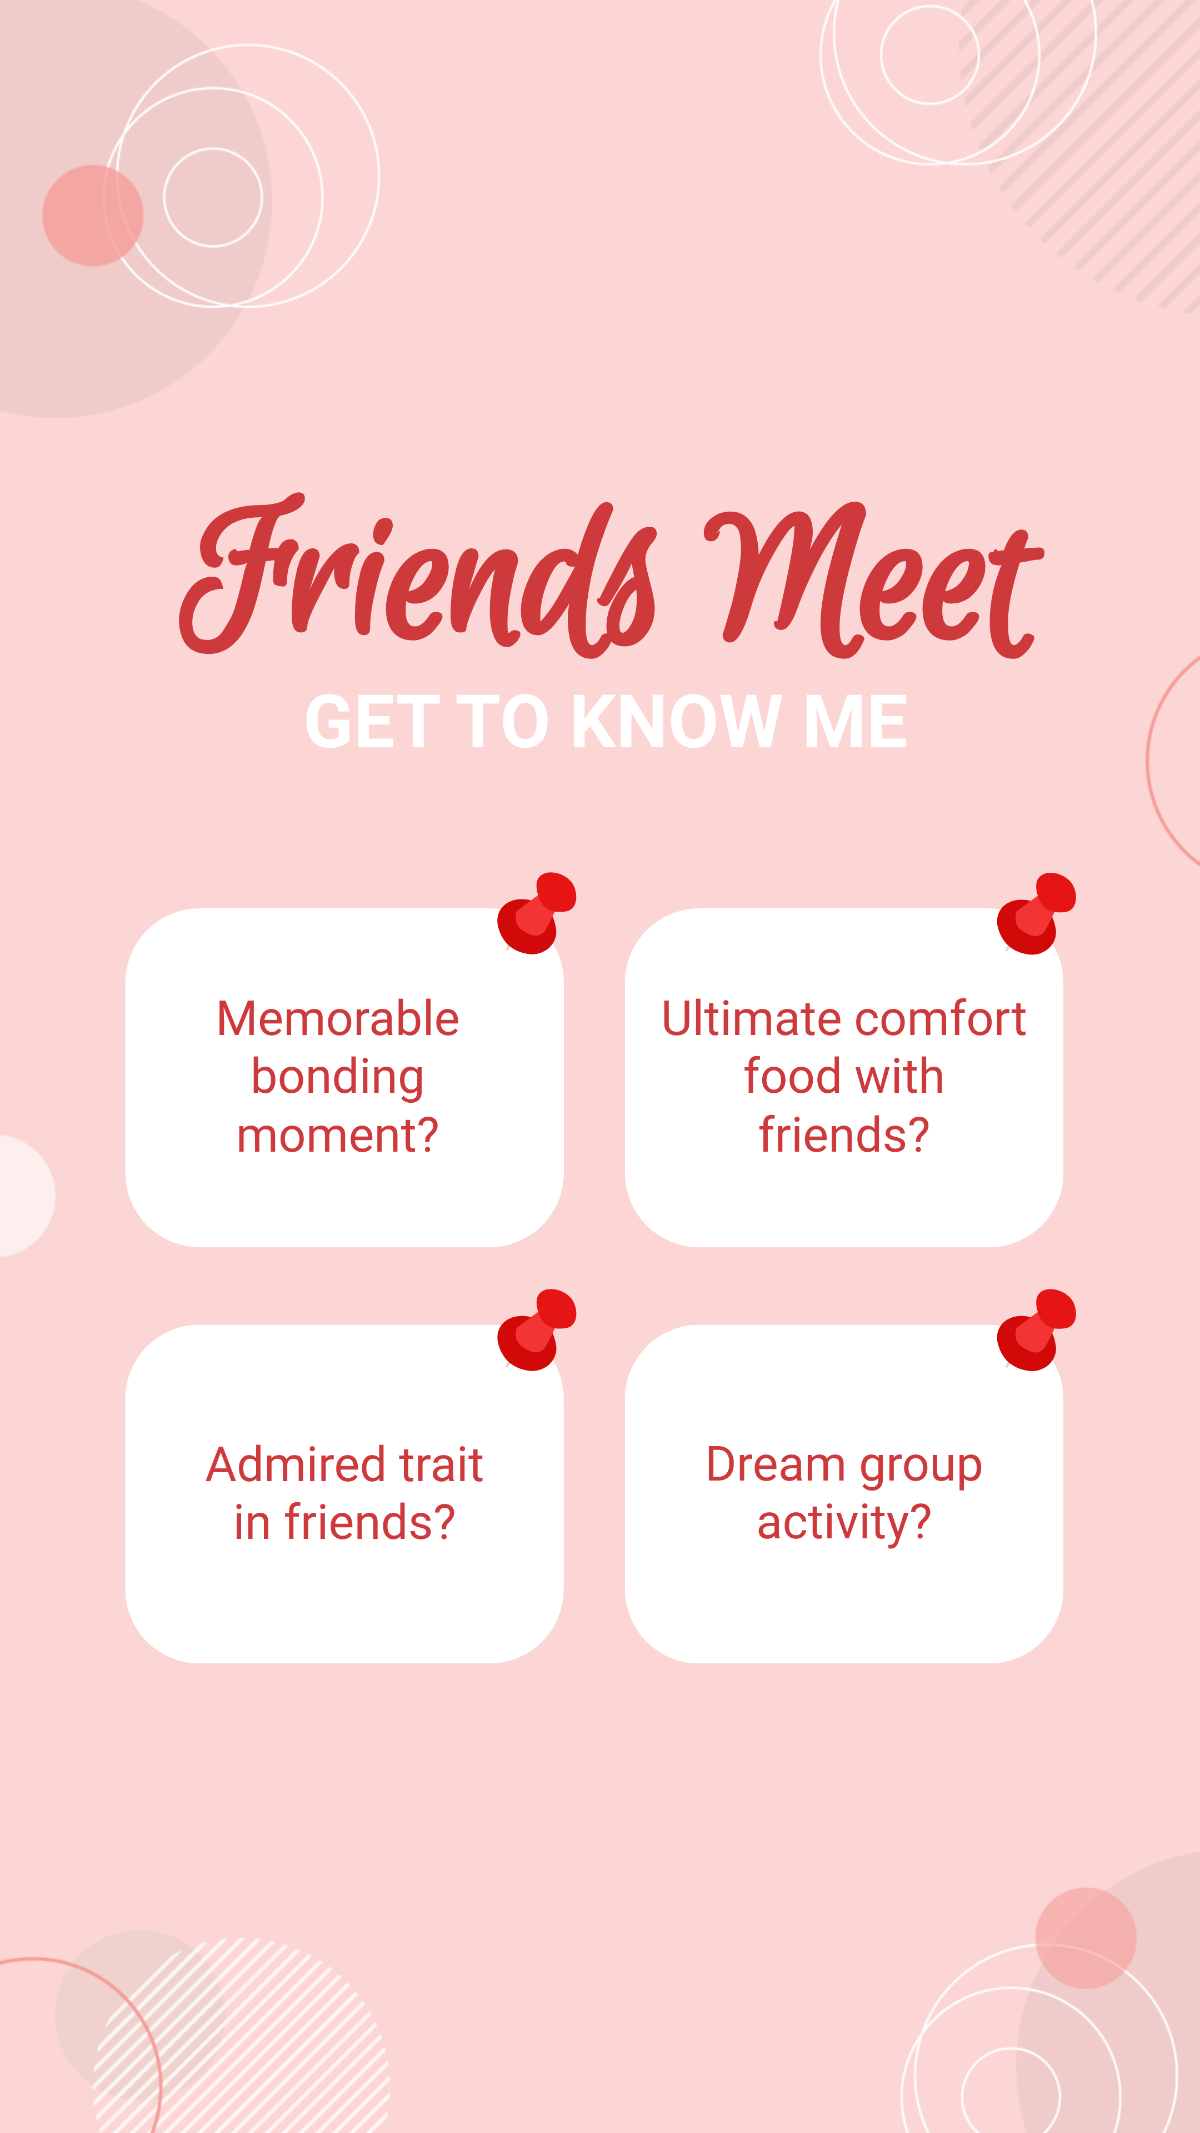 Free Get to Know Me Friendship Meet Instagram Post Template